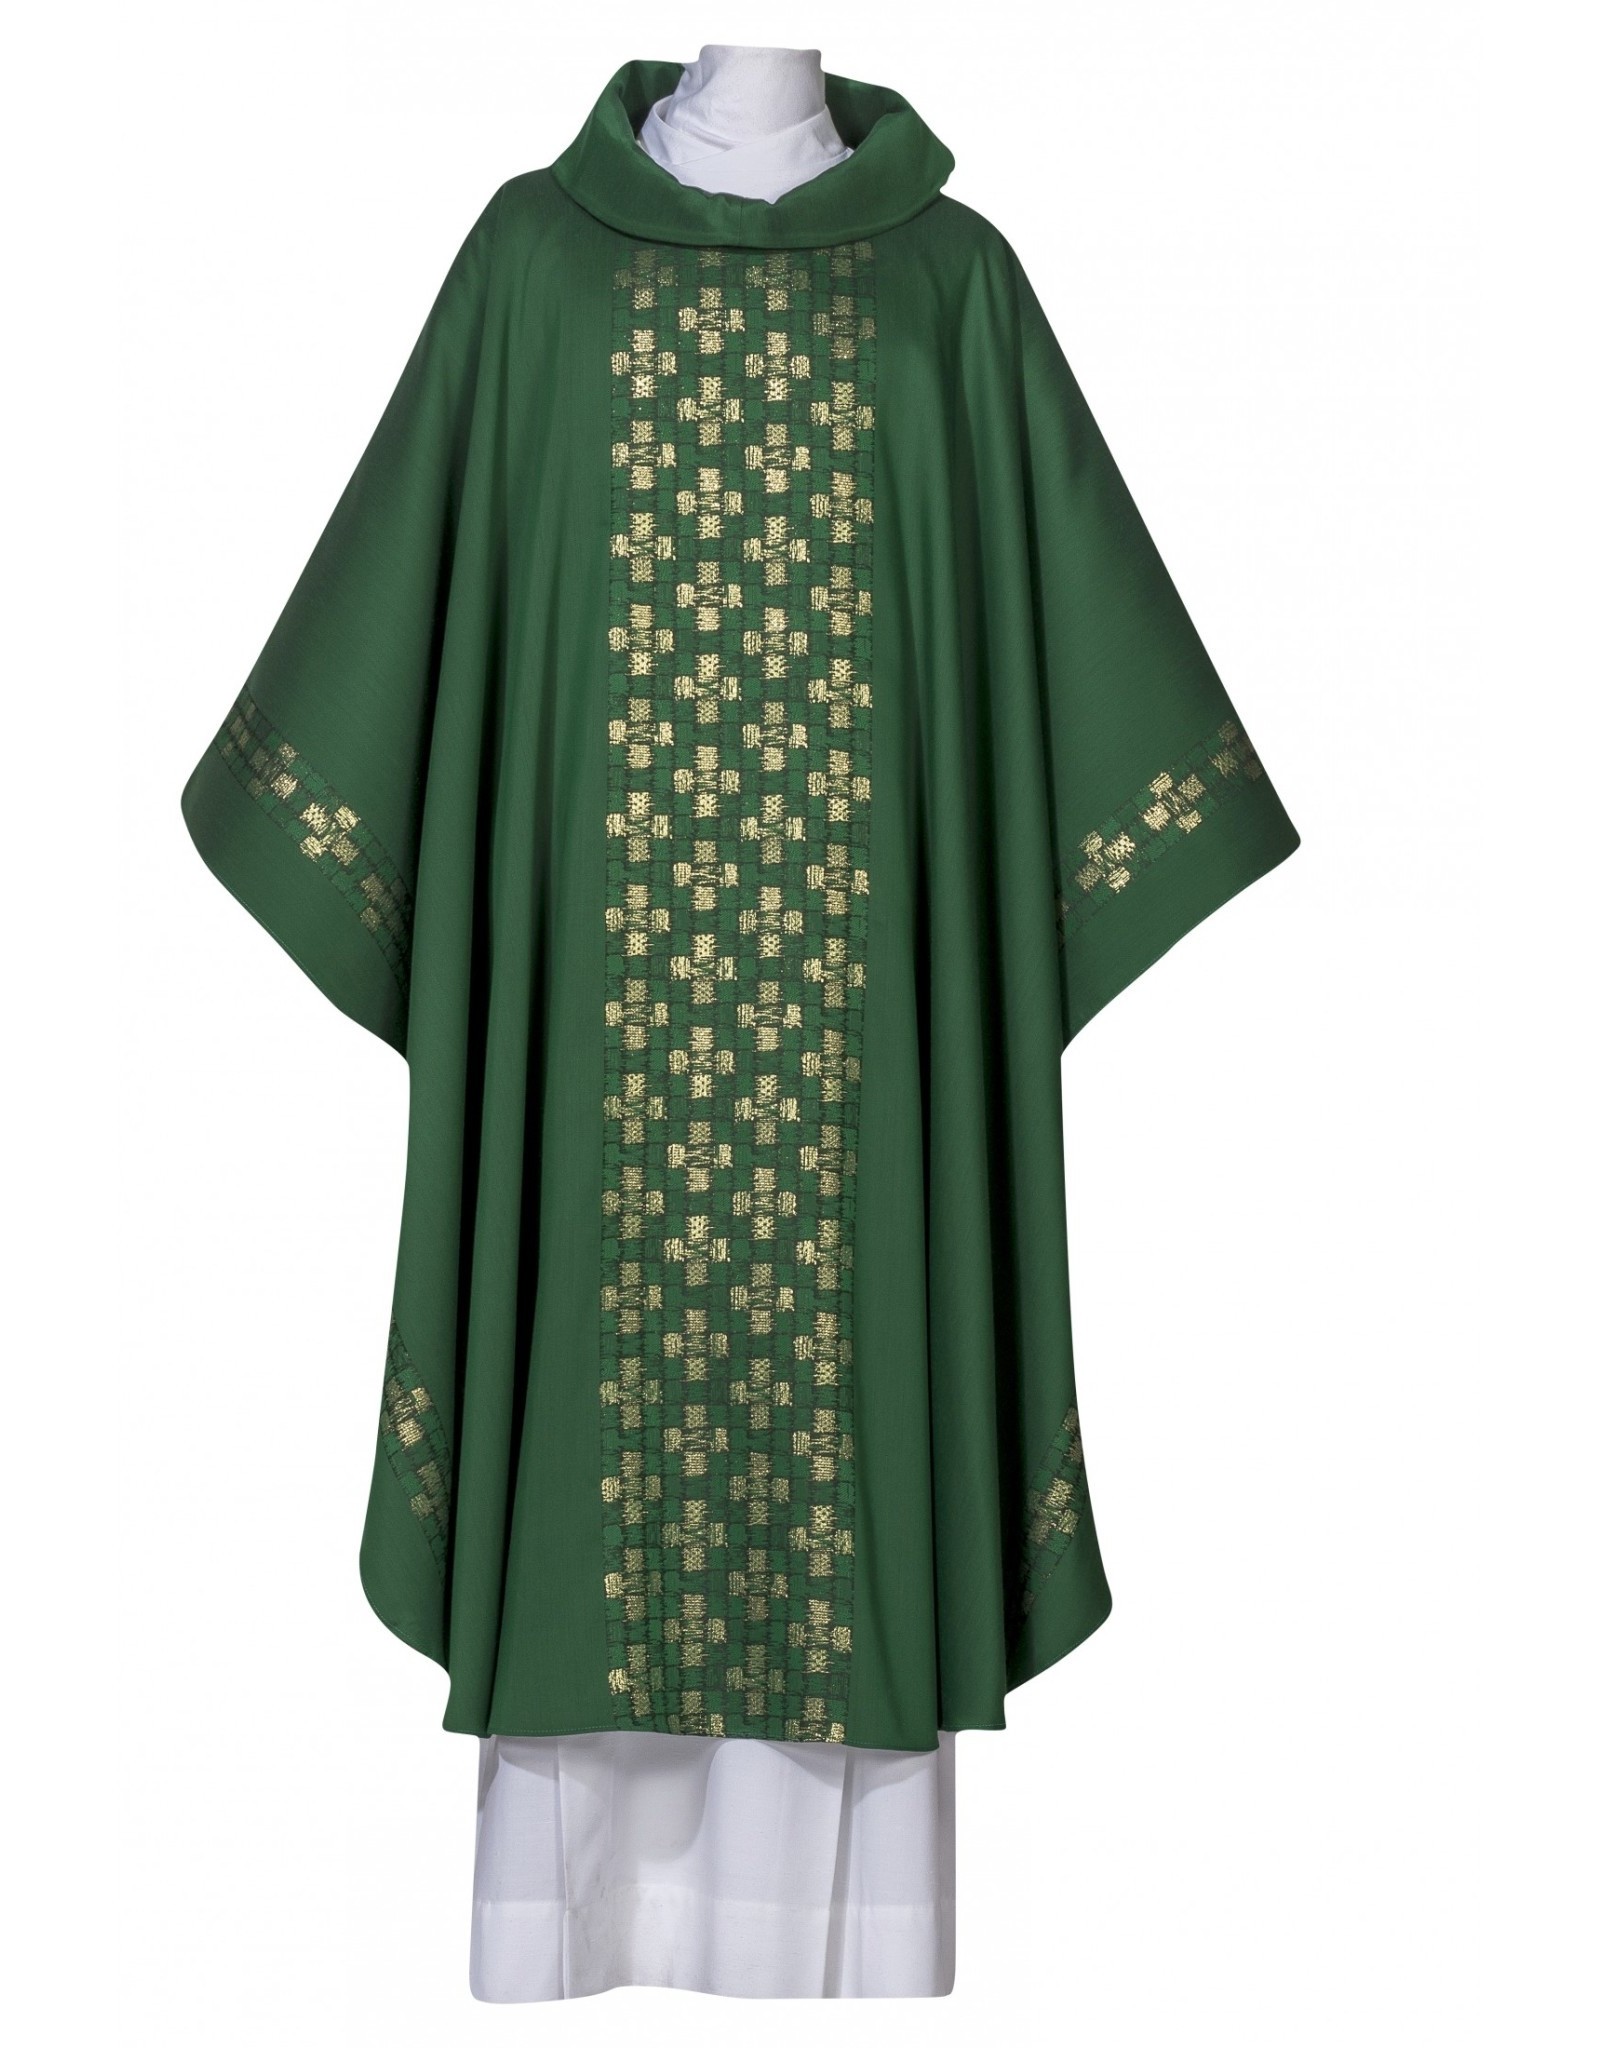 Arte Grosse Chasuble - Woven Orphrey - Cowl Neck - 80% Poly/19% Wool/1% Lurex -